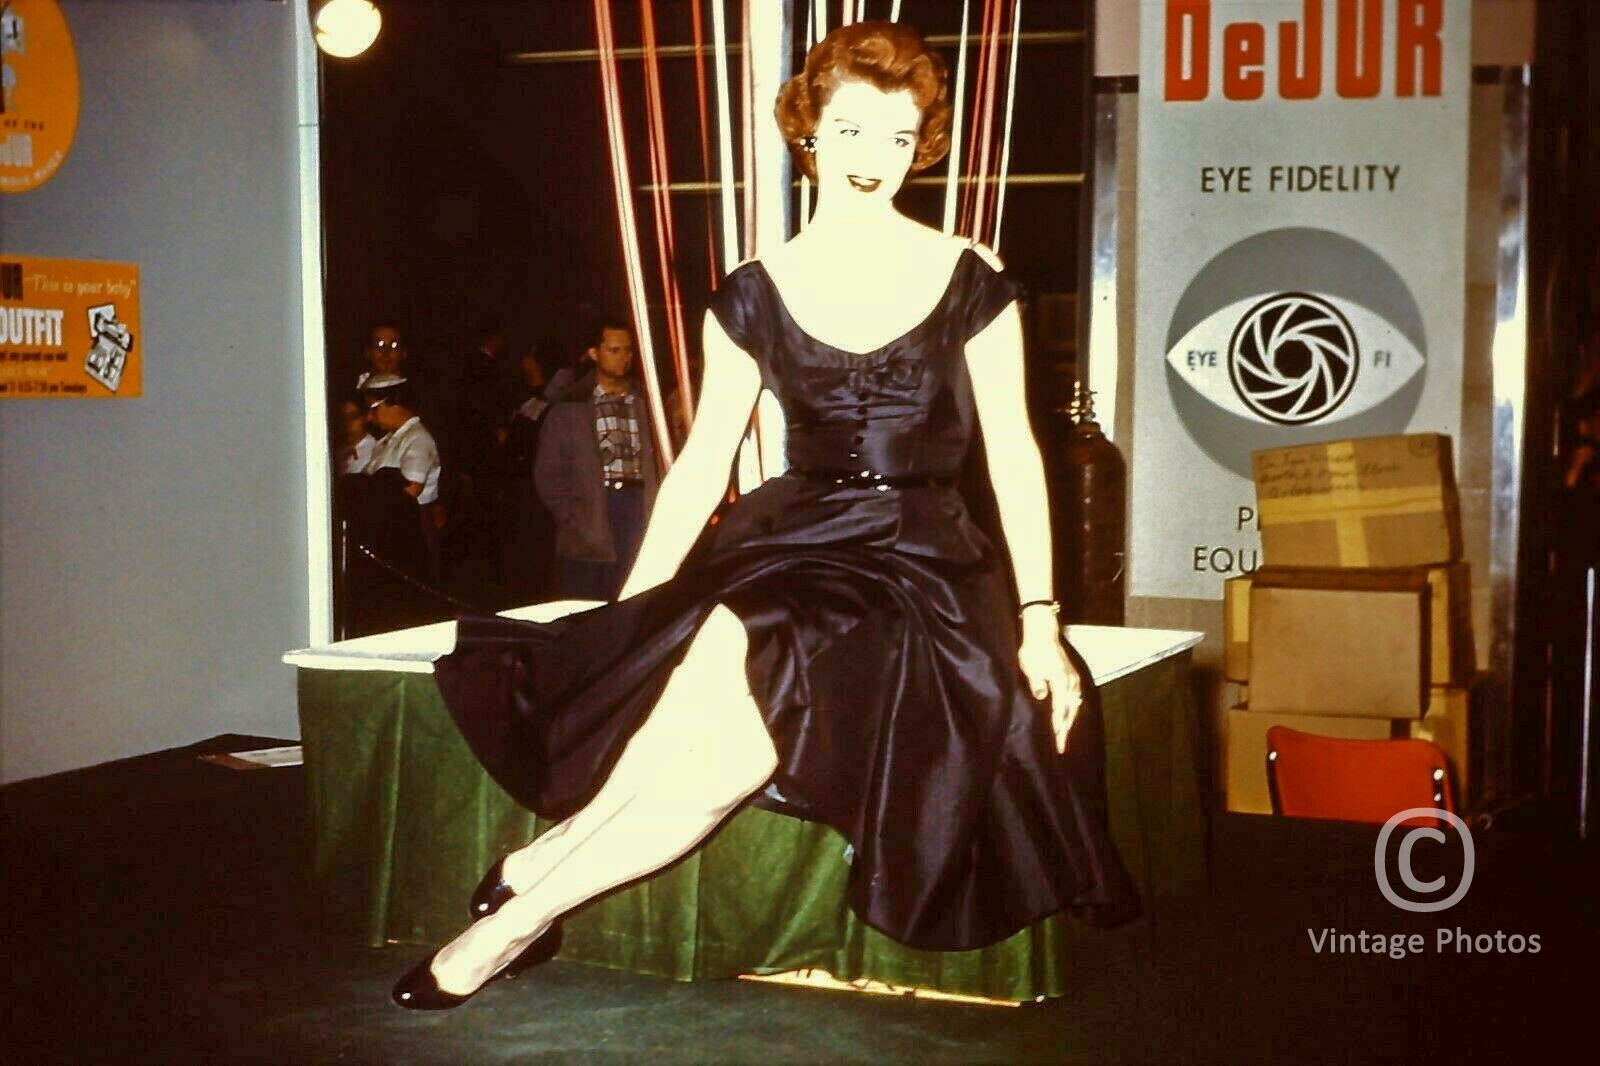 1956 Photographic Show with Model - DEJoR